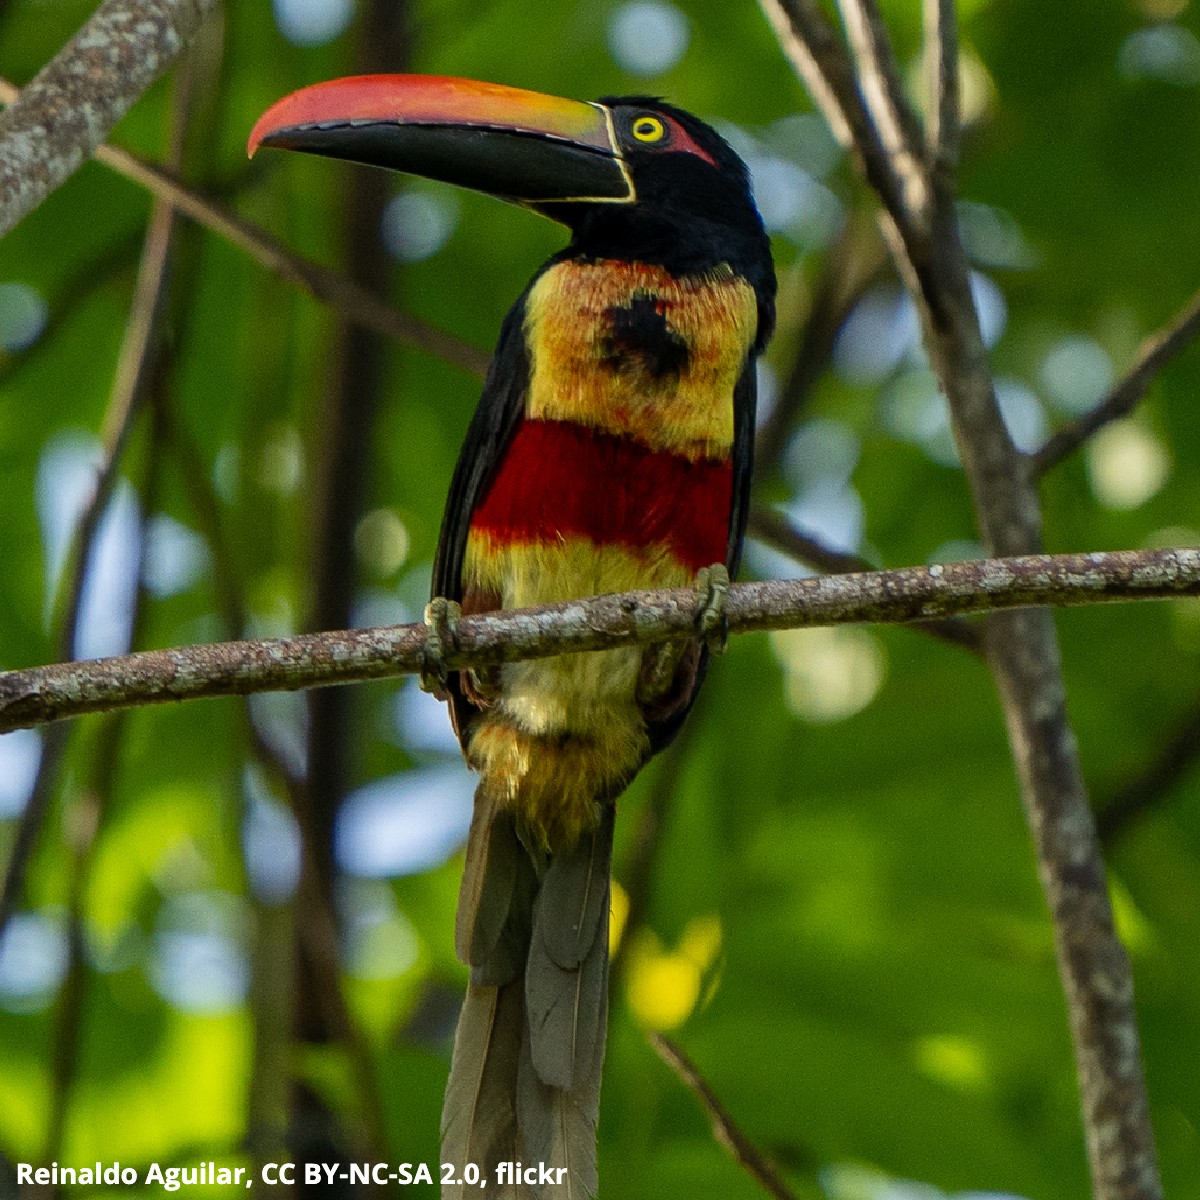 Behold the Fiery-billed Araçari  This bright-beaked bird lives in humid forests in Costa Rica & Panama, where it snacks on fruits, insects, & eggs. It might even eat the juveniles & eggs of pigeons or woodpeckers while also stealing theirs nests for itself.